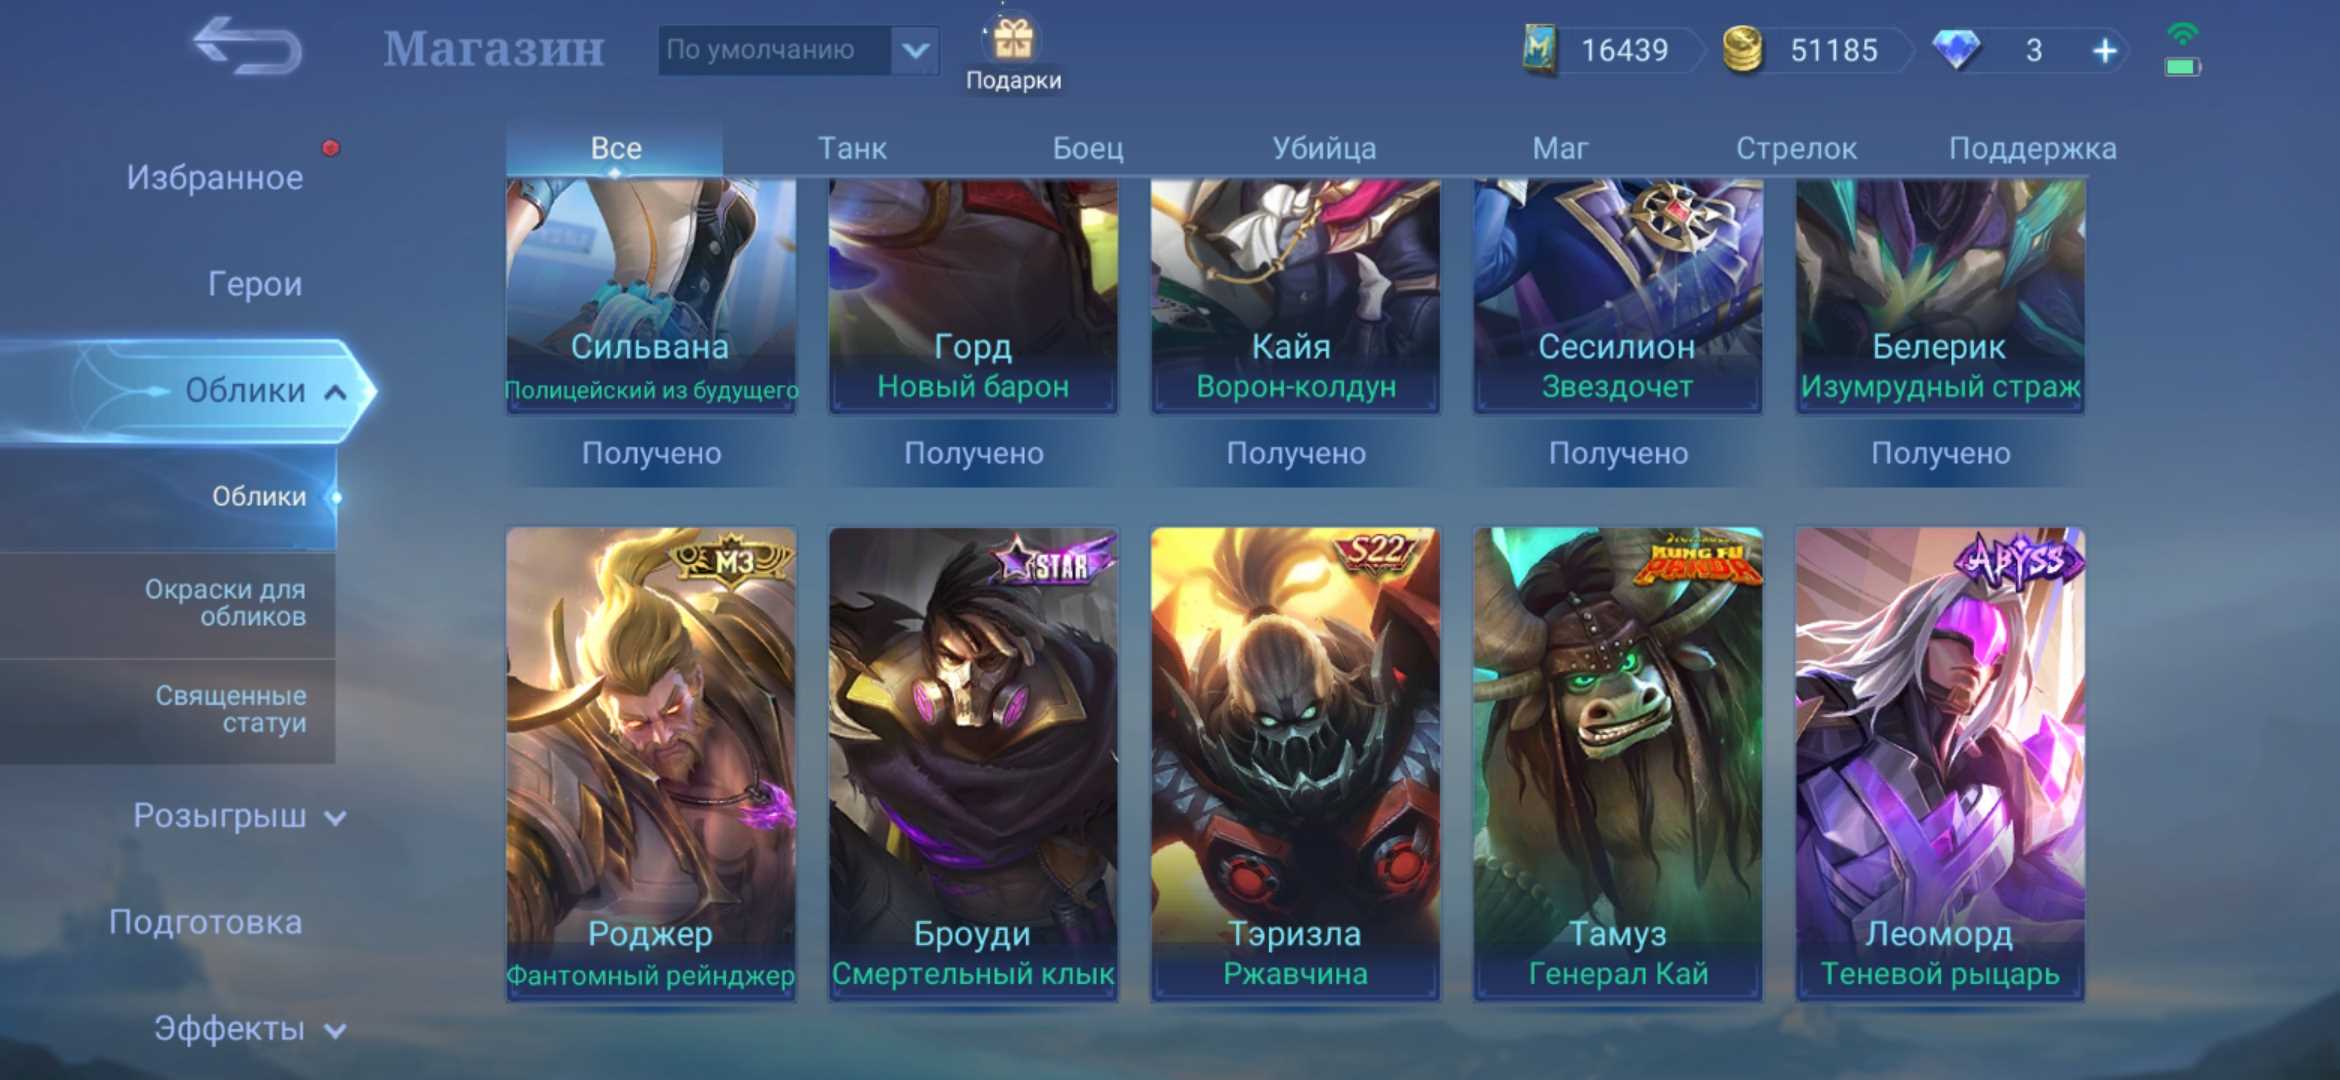 Game account sale Mobile Legends